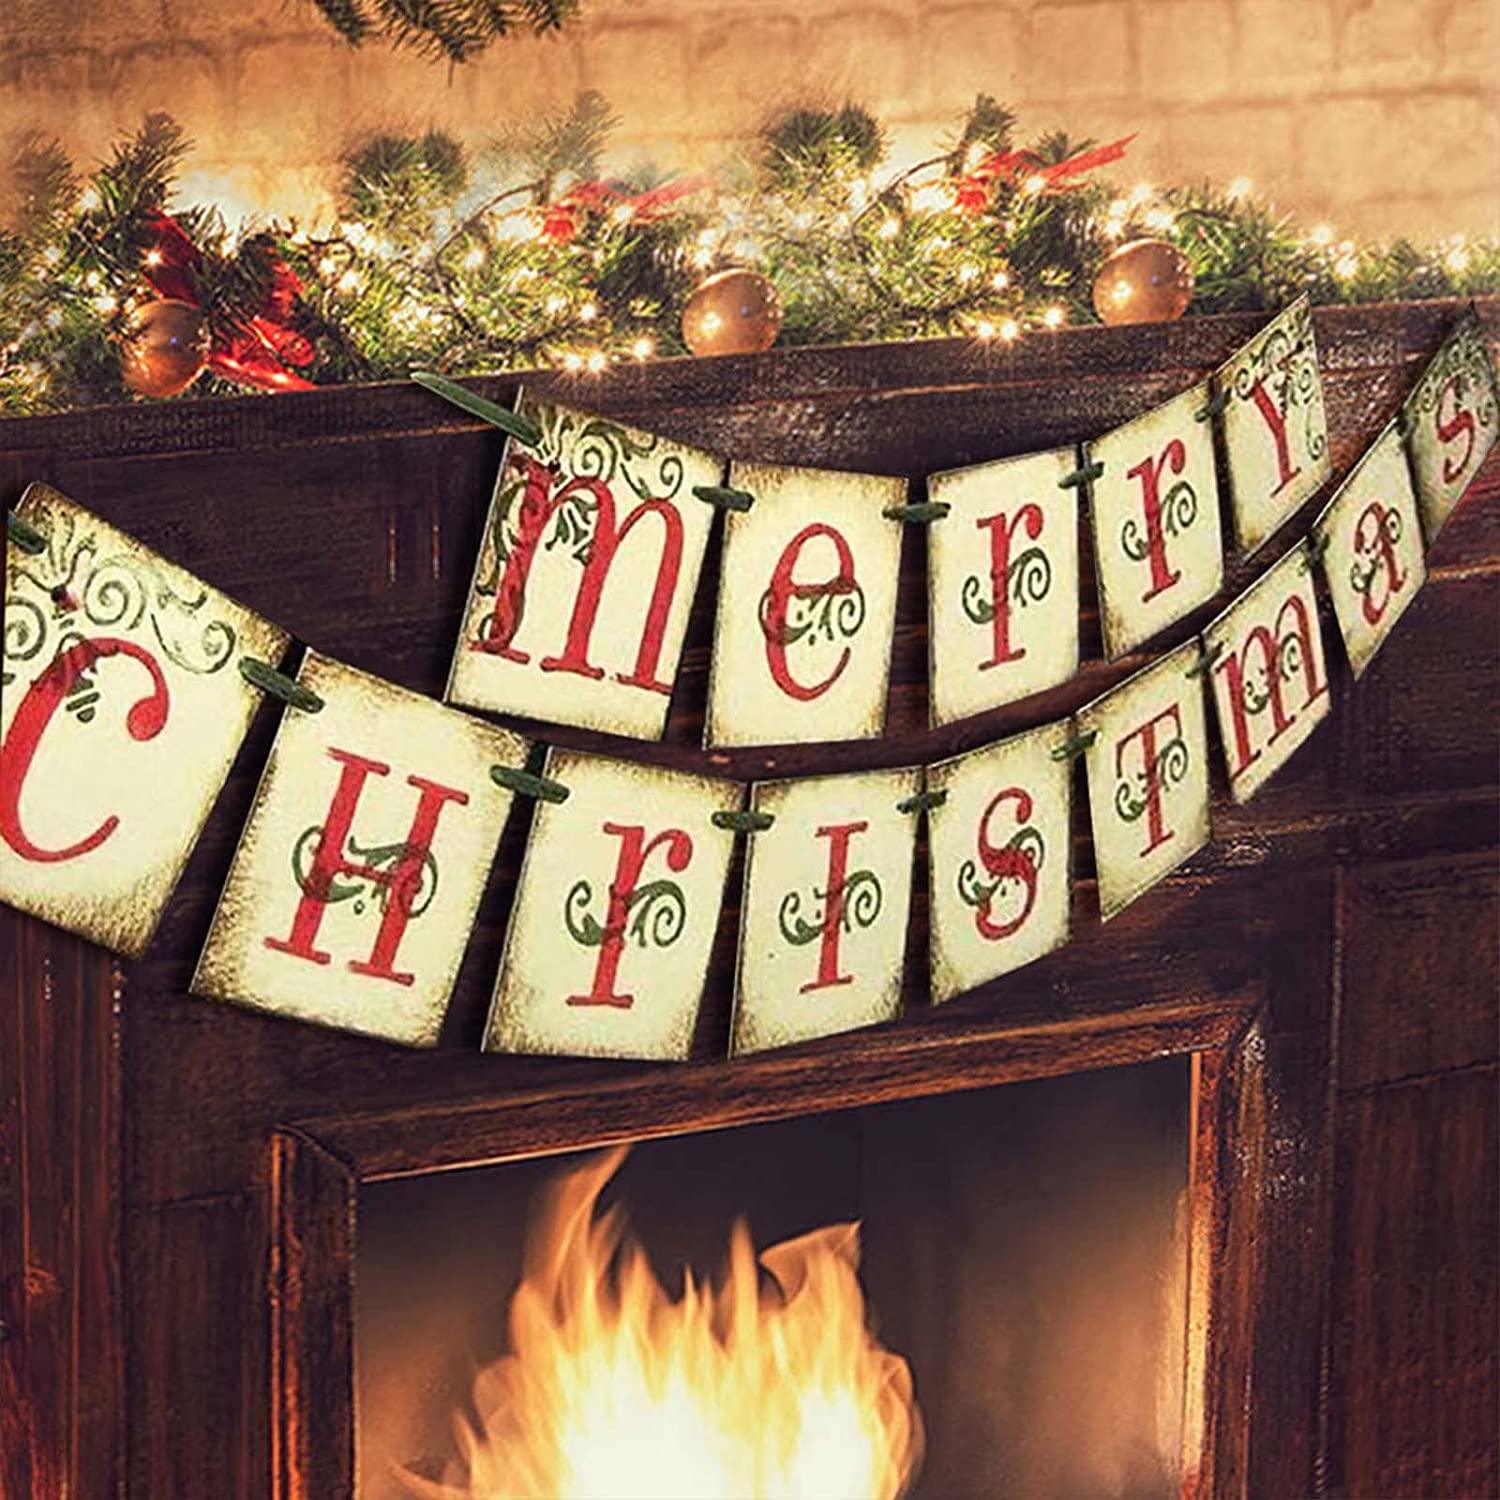 Merry Christmas Banner Vintage Xmas Decorations Indoor for Home Office Party Fireplace Mantle Farmhouse Decor - Lasercutwraps Shop